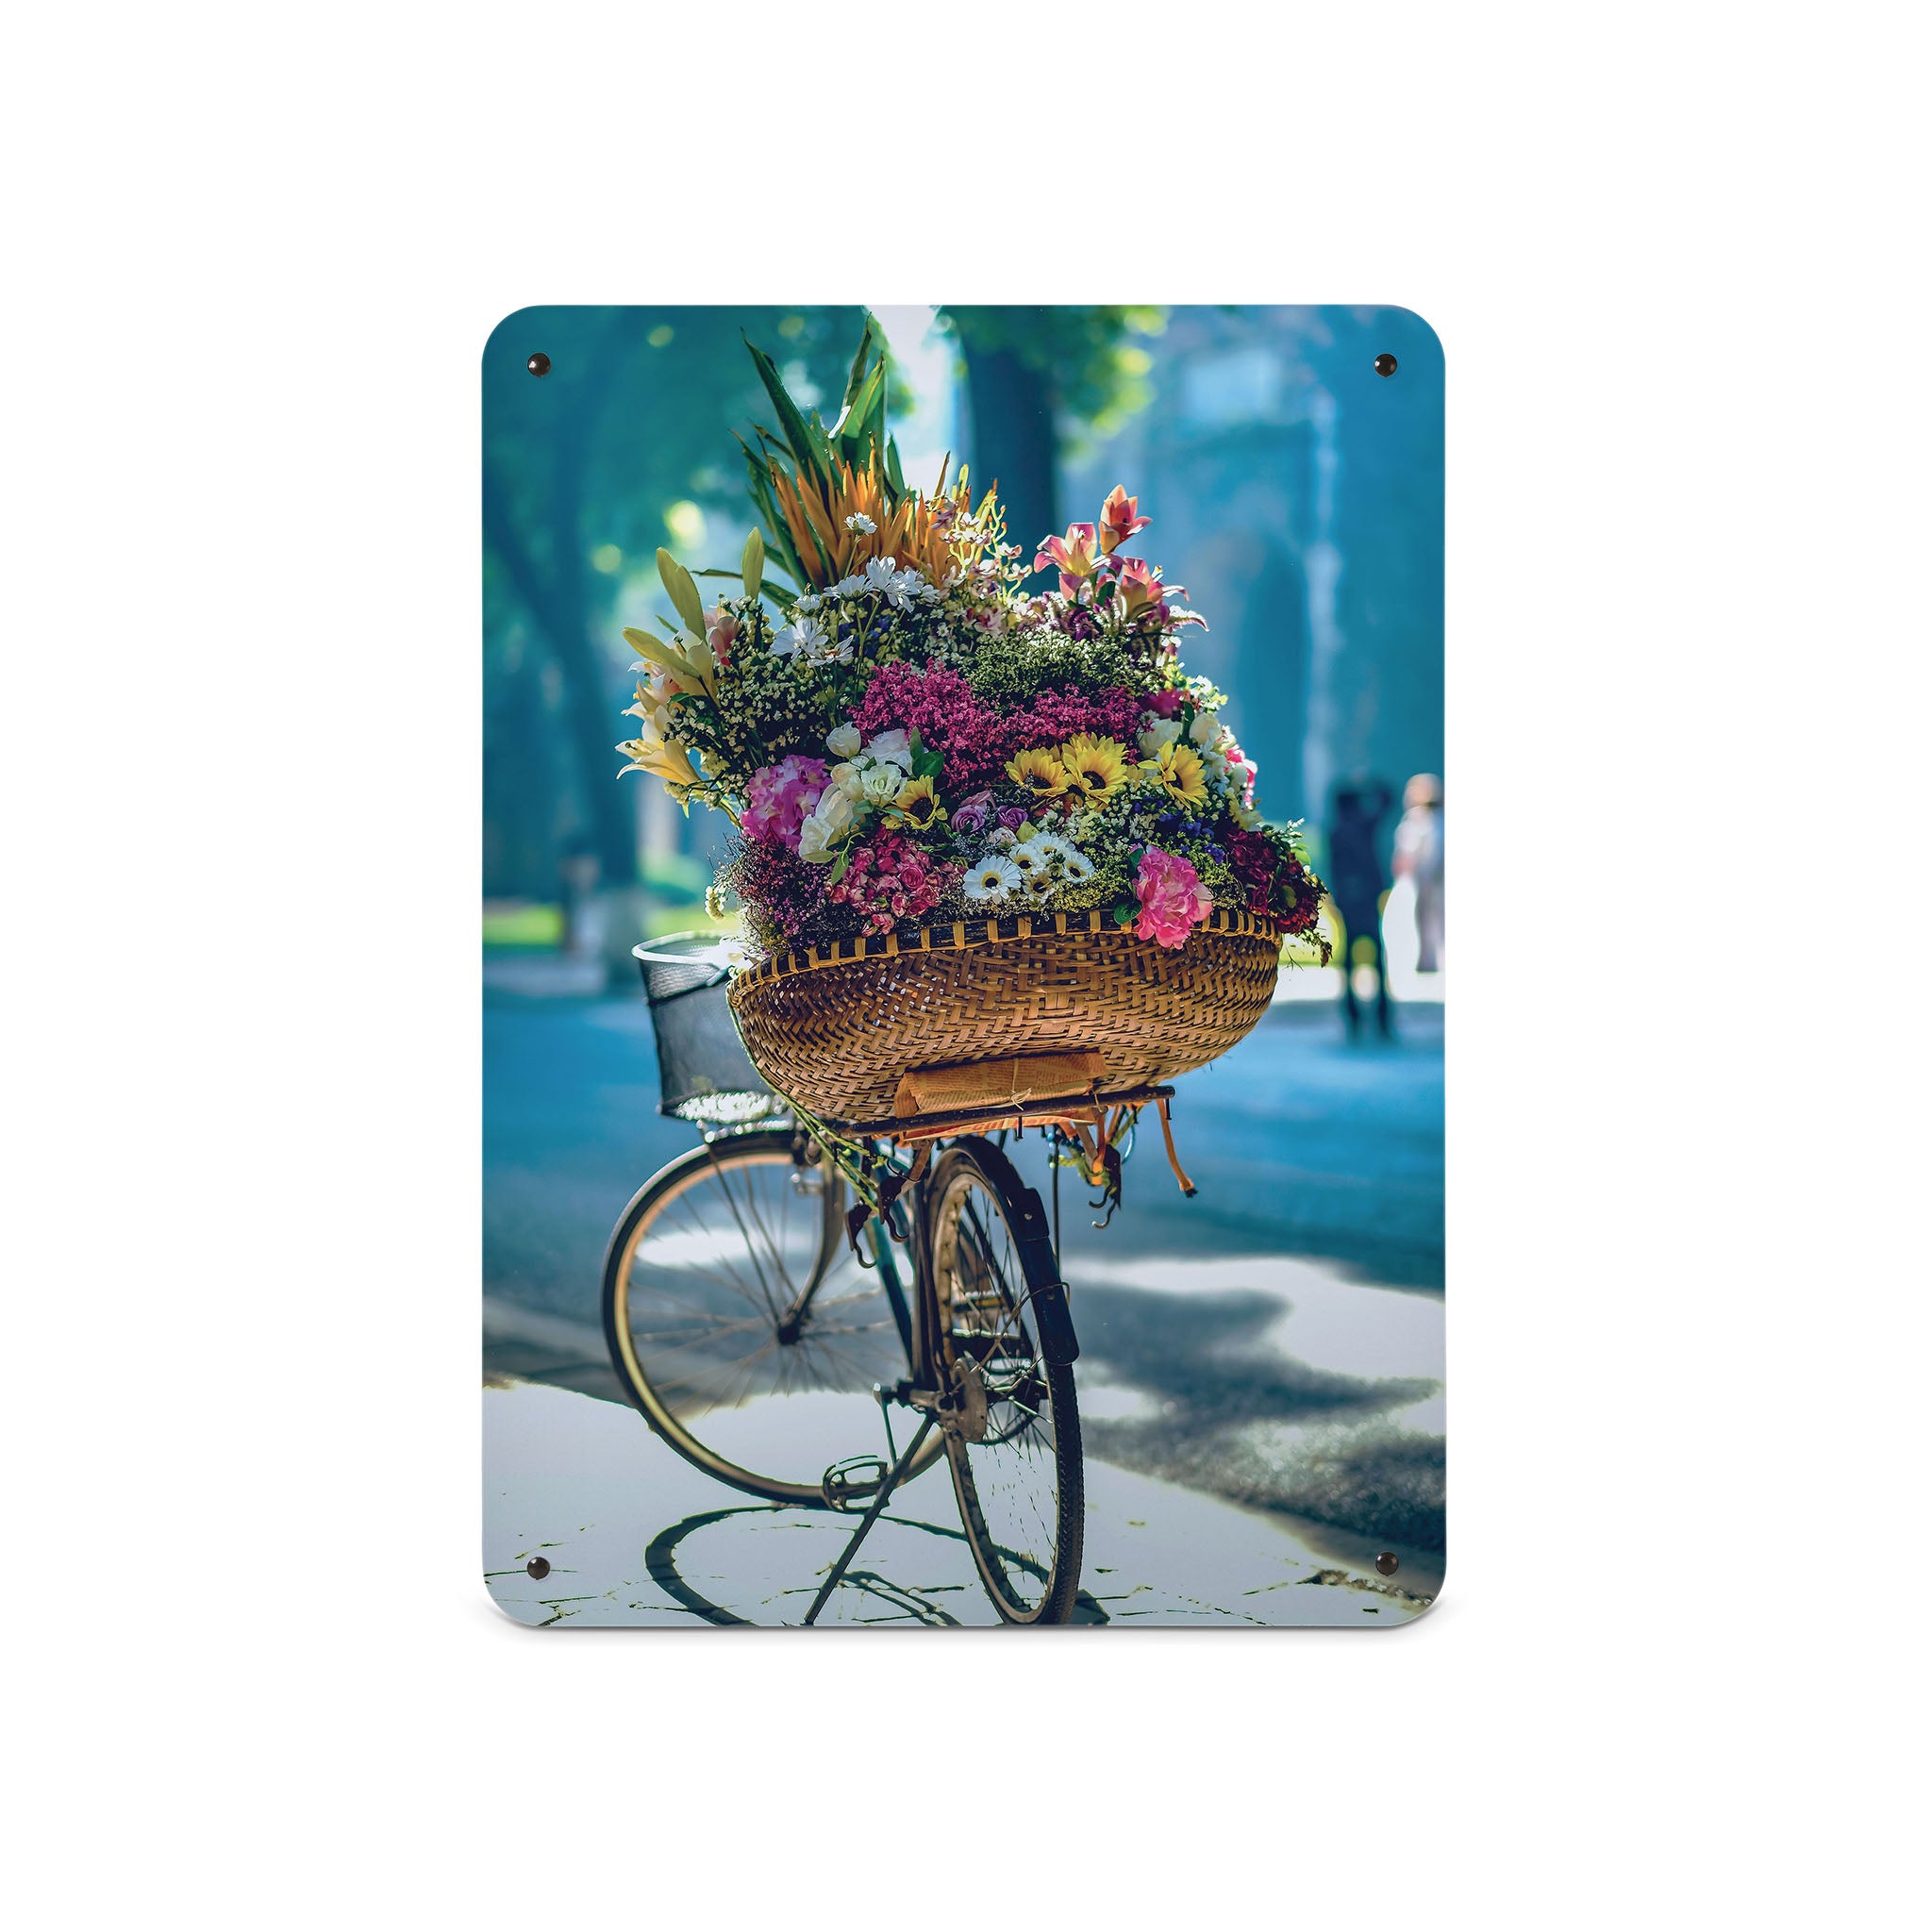 A medium magnetic notice board by Beyond the Fridge with a photograph of a bicycle and a large basket of flowers